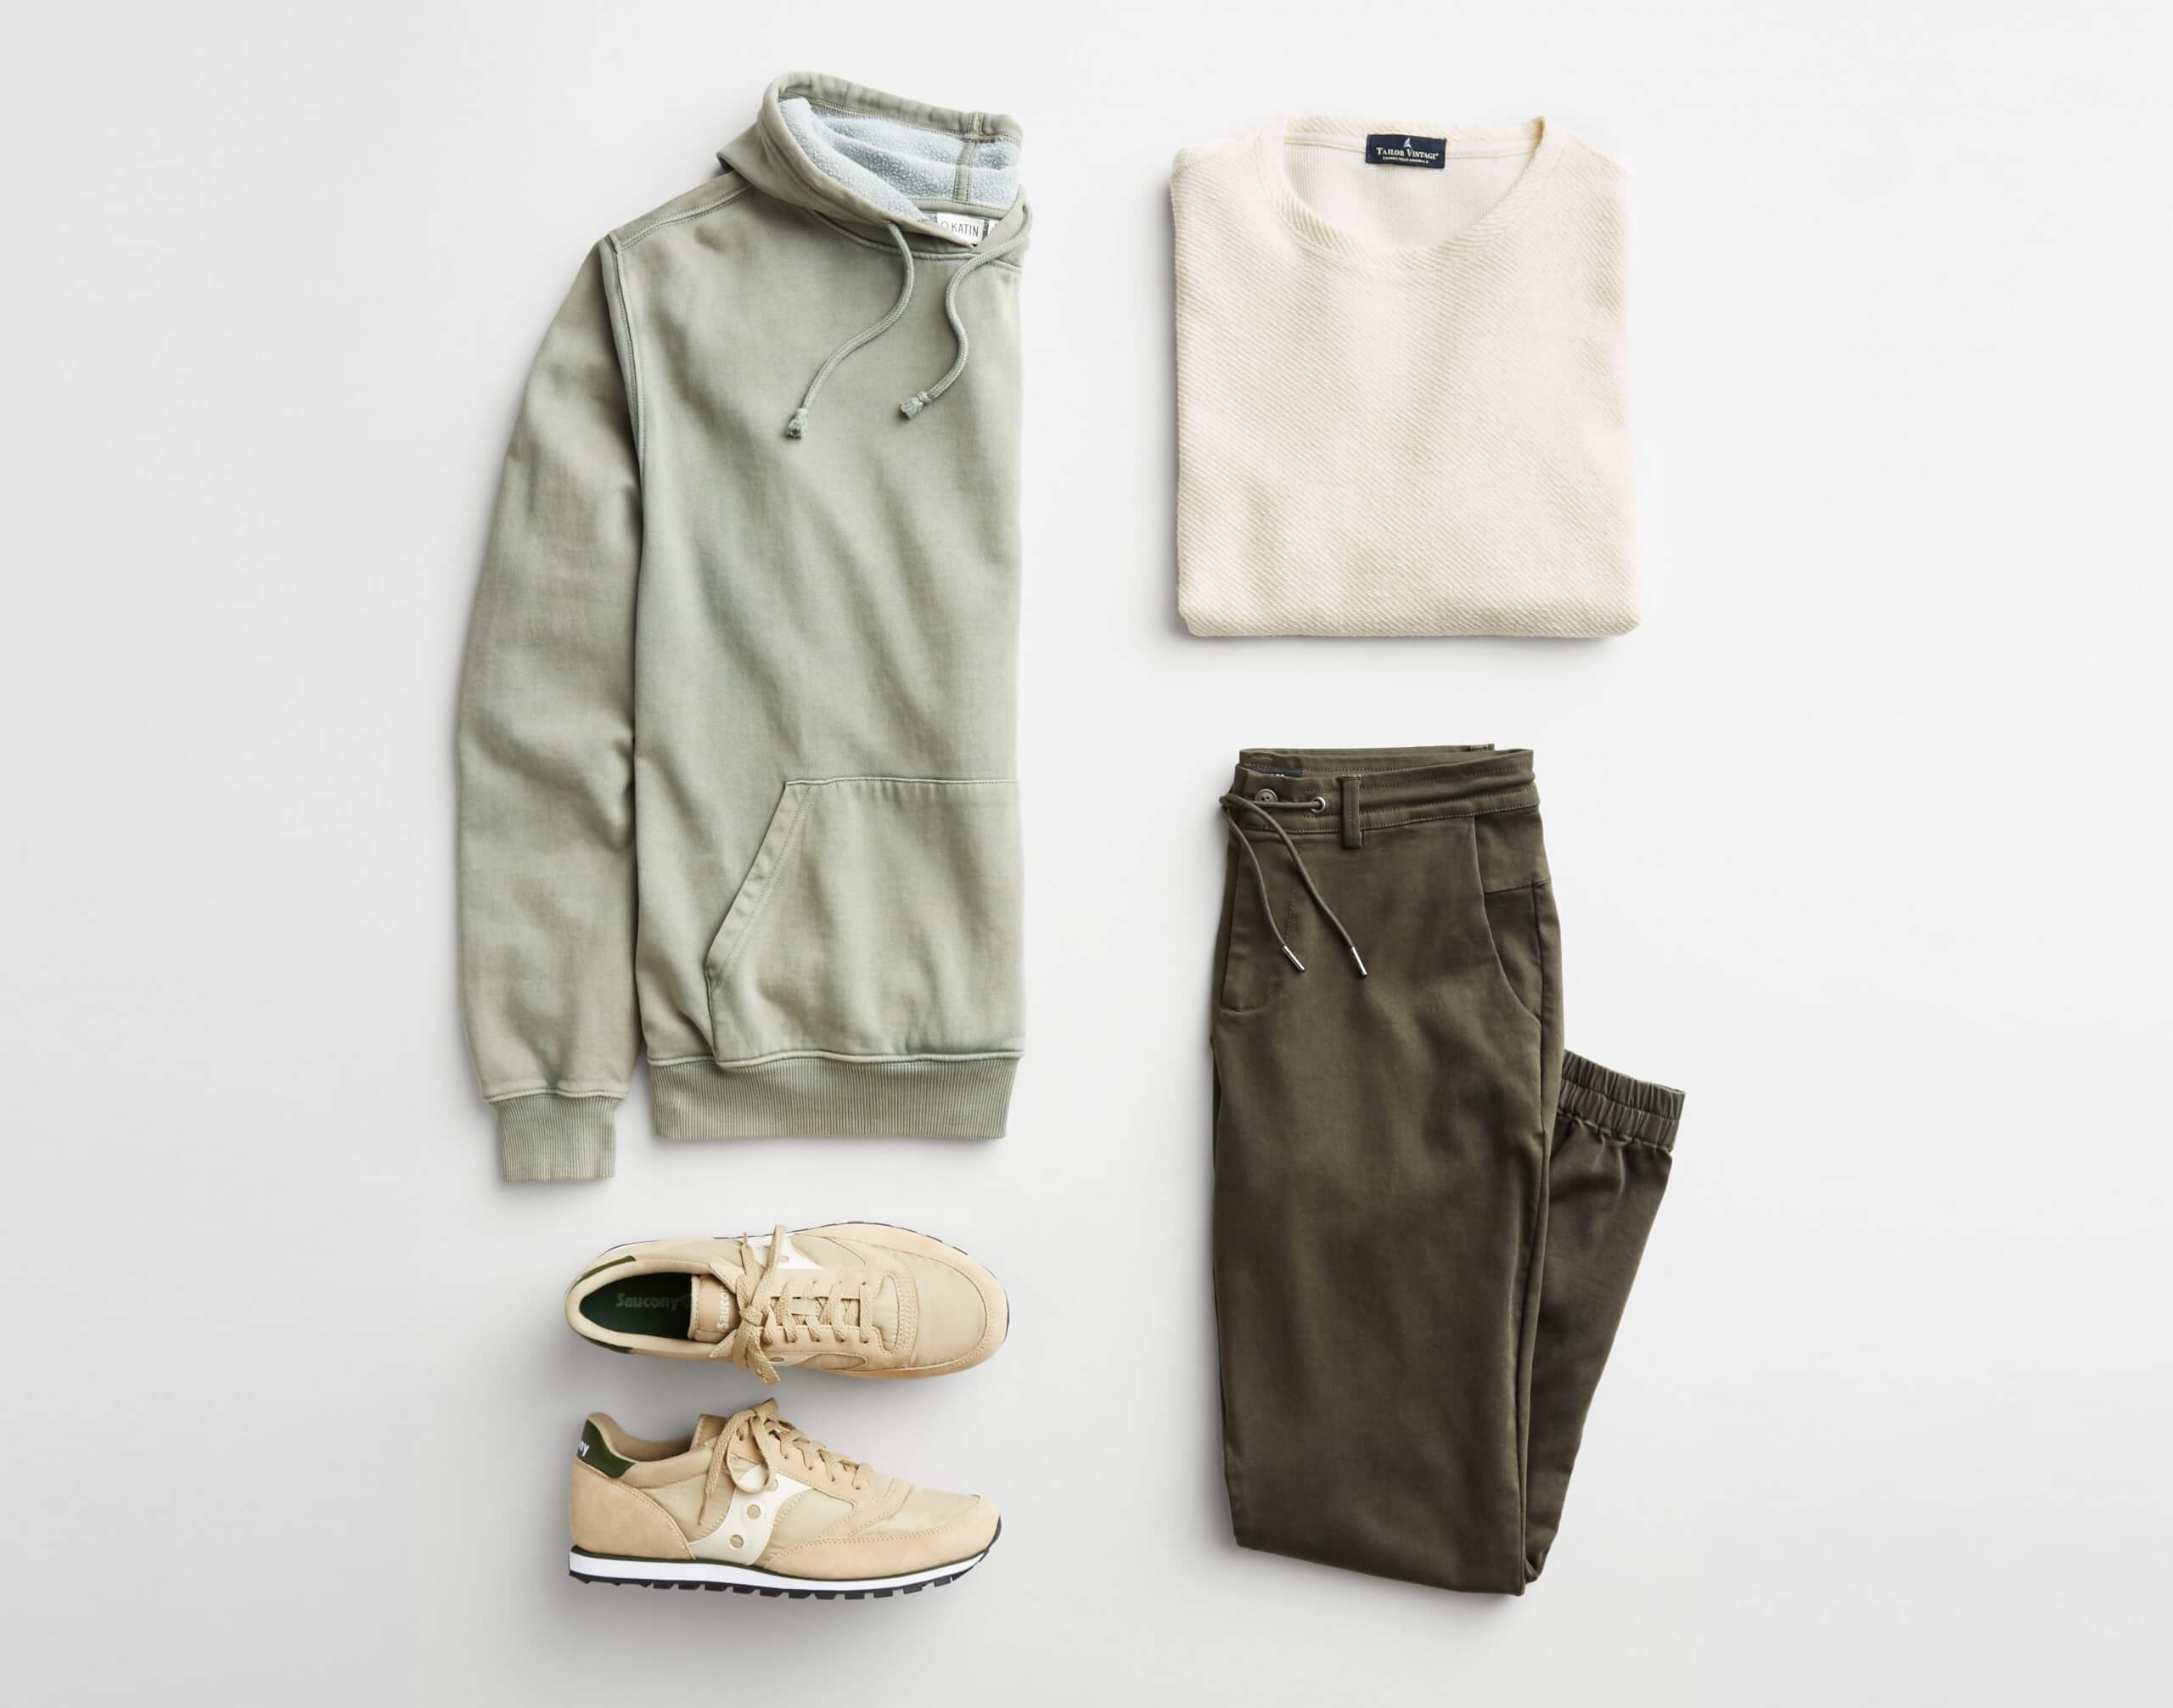 Men's Street Style Guide, Personal Styling